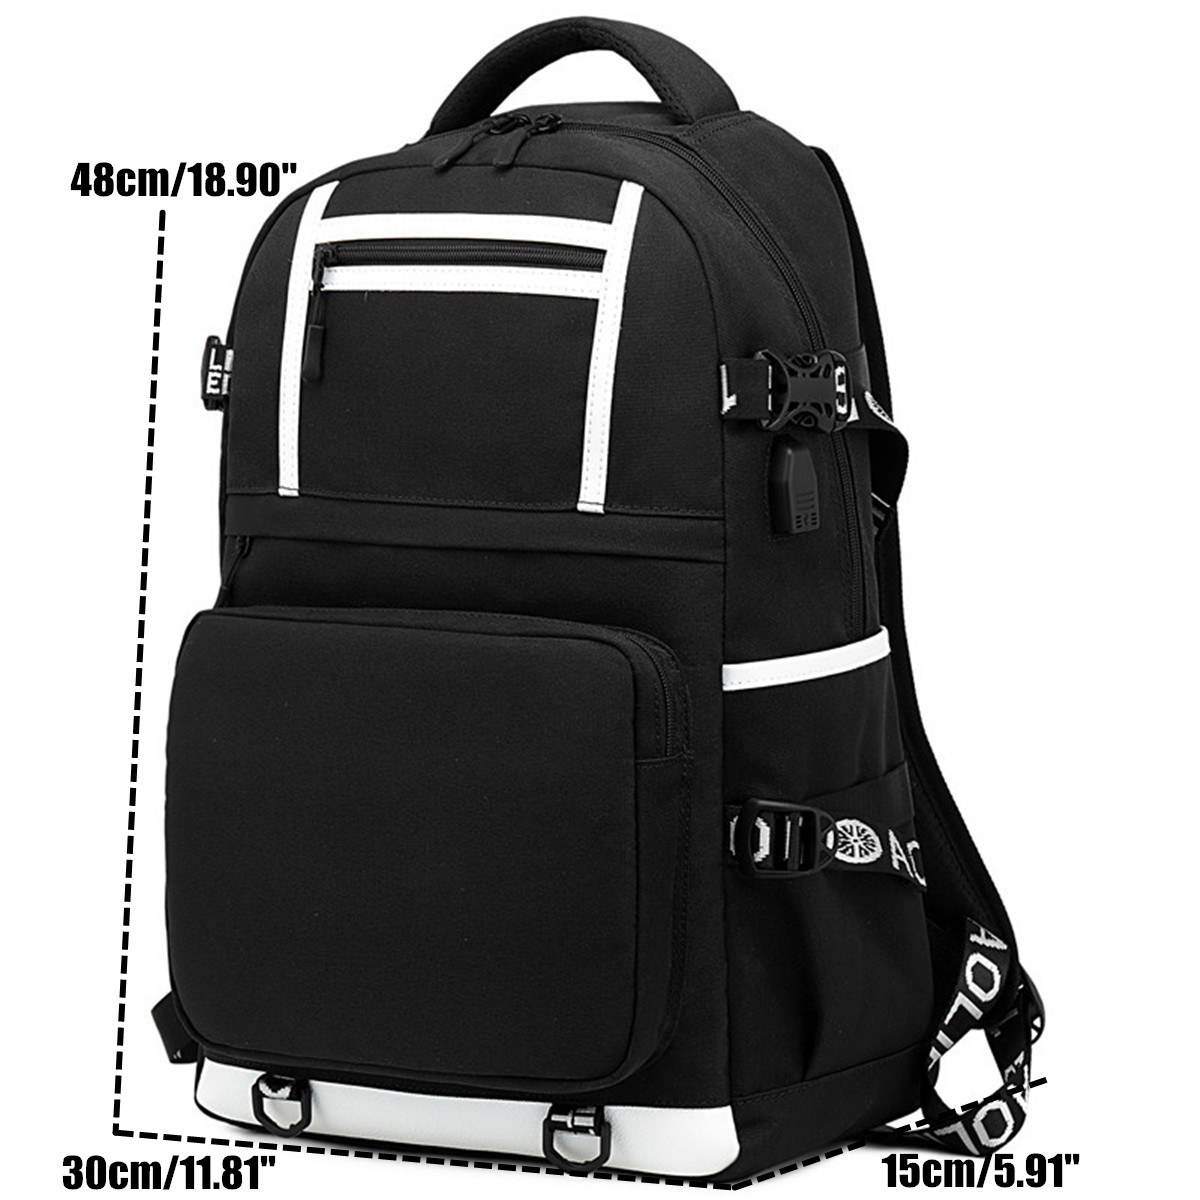 Oxford-Cloth-Waterproof-Laptop-Bag-Backpack-Travel-Bag-With-External-USB-Charging-Port-1509426-8